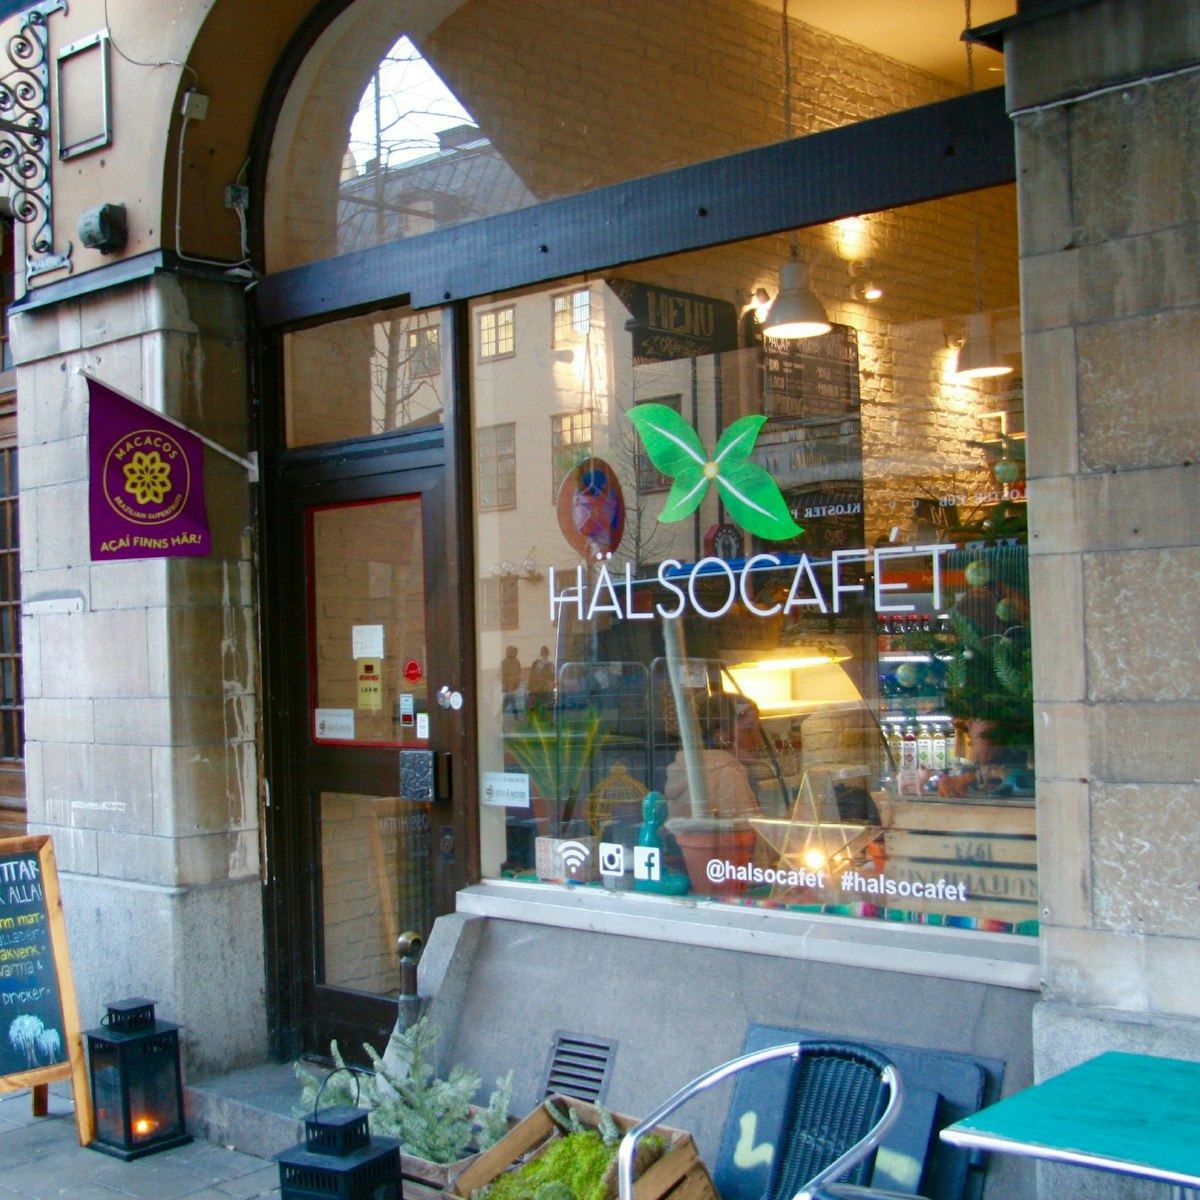 Outside view of Hälsöcafet facade